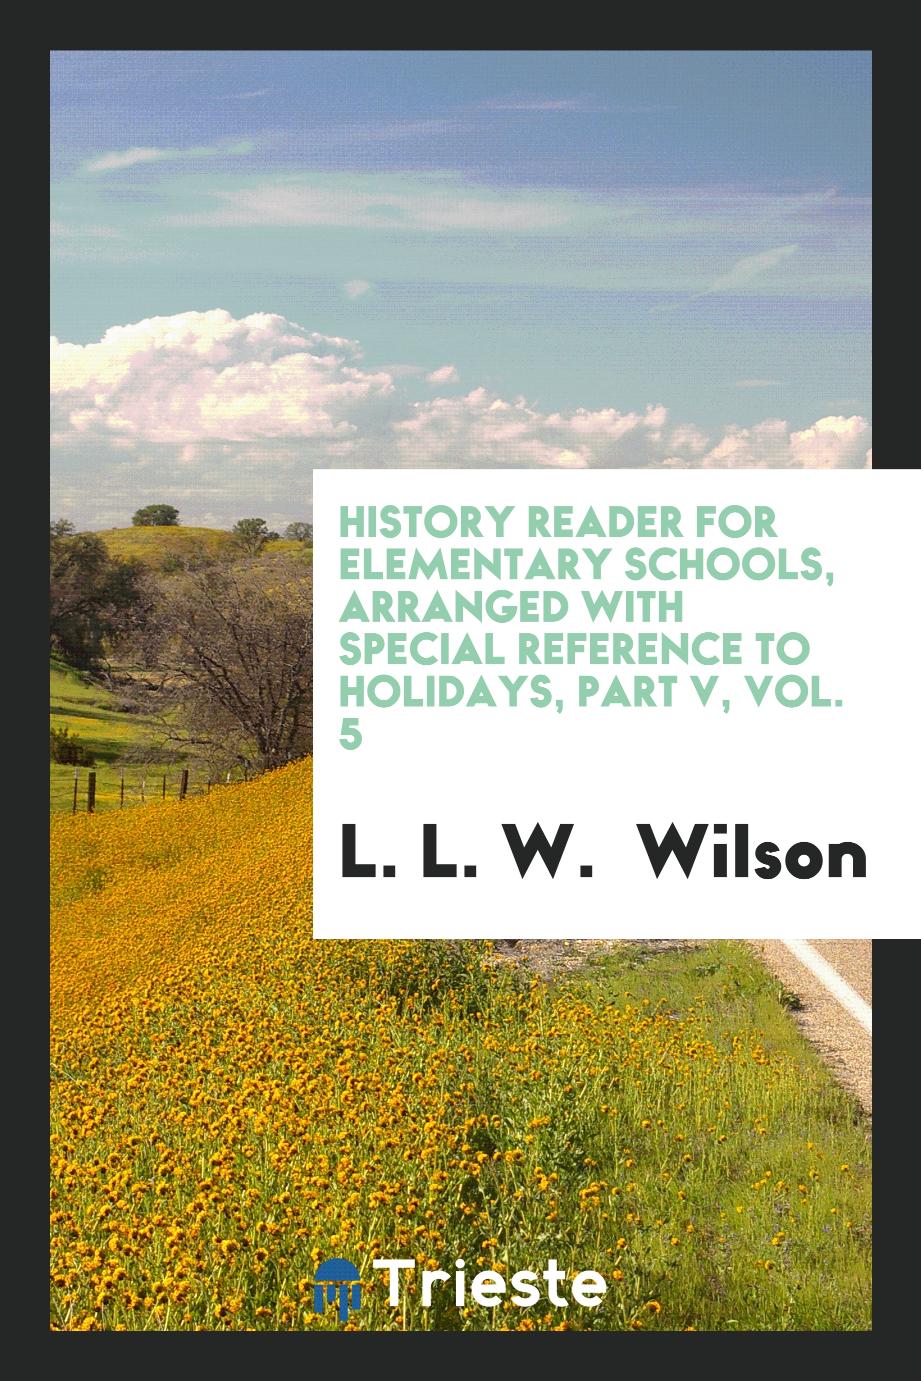 History Reader for Elementary Schools, Arranged with Special Reference to Holidays, Part V, Vol. 5